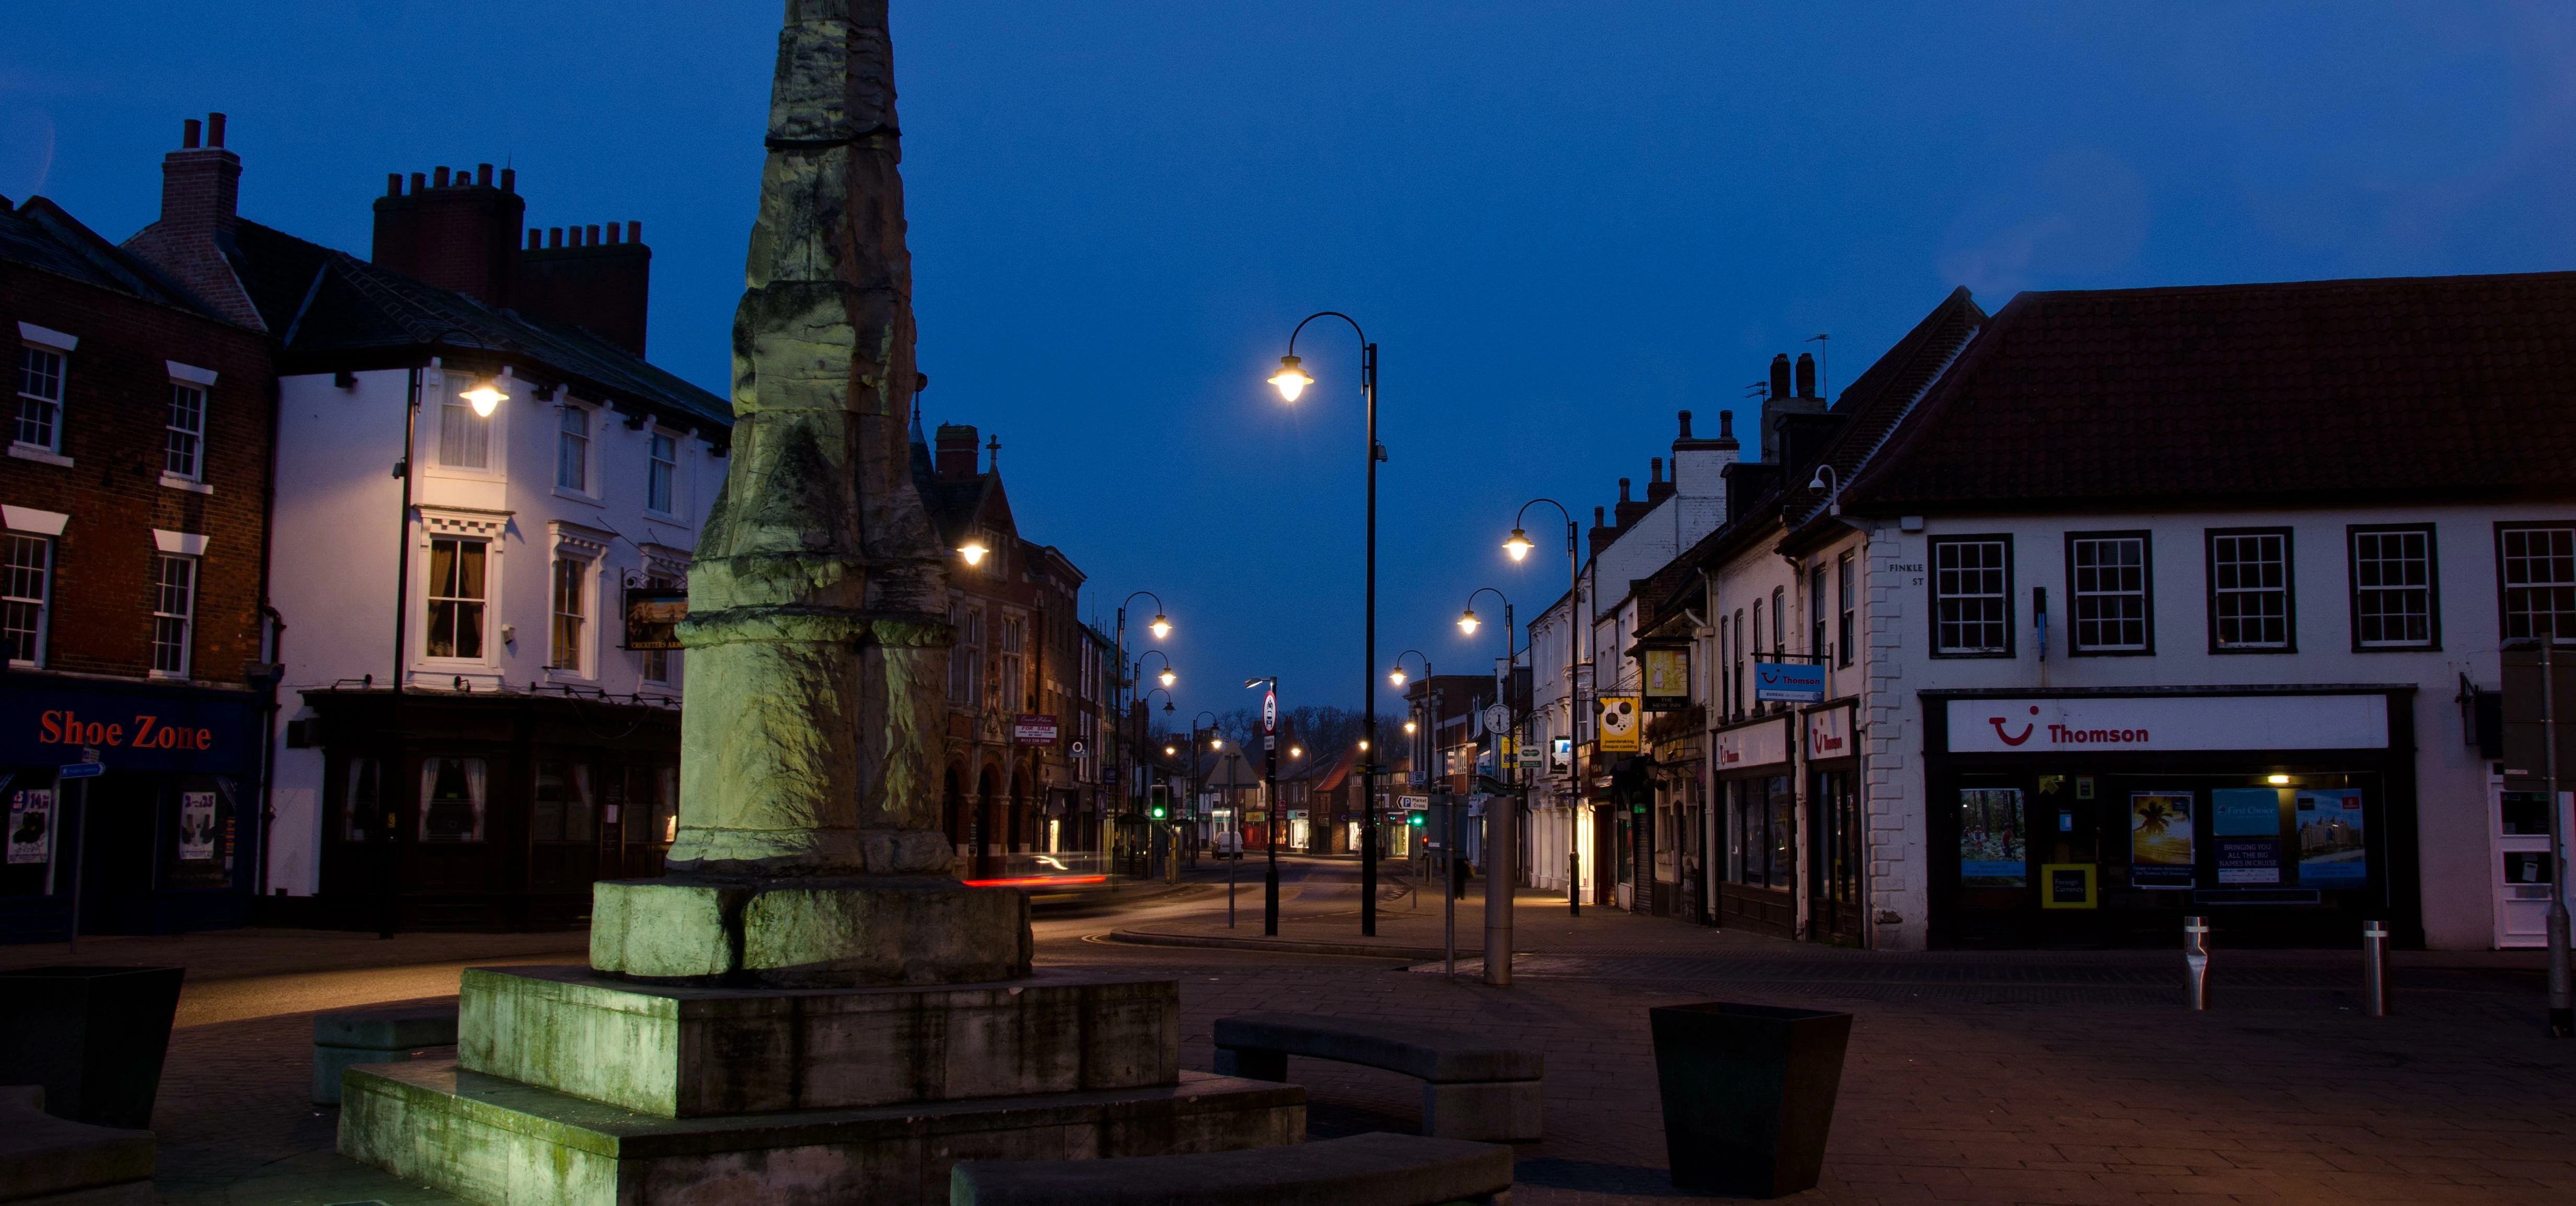 Market Cross and Gowthorpe Selby.jpg